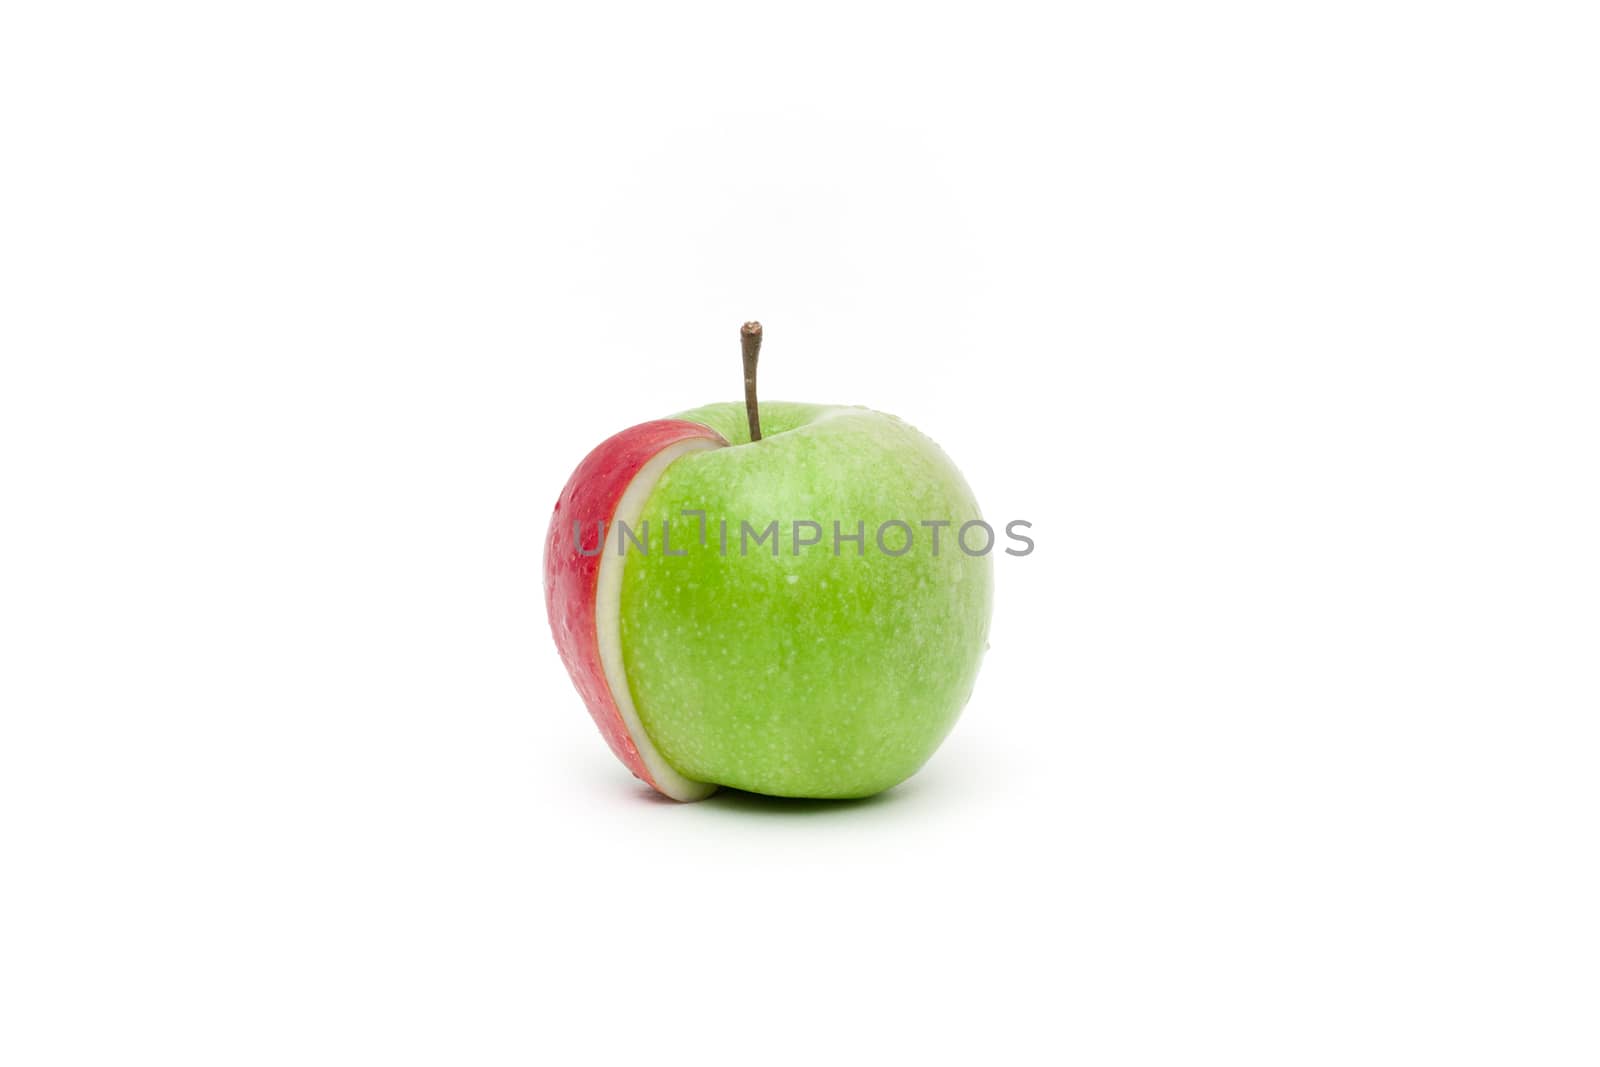 Conceptual view on a green fresh apple with a red slice attached to